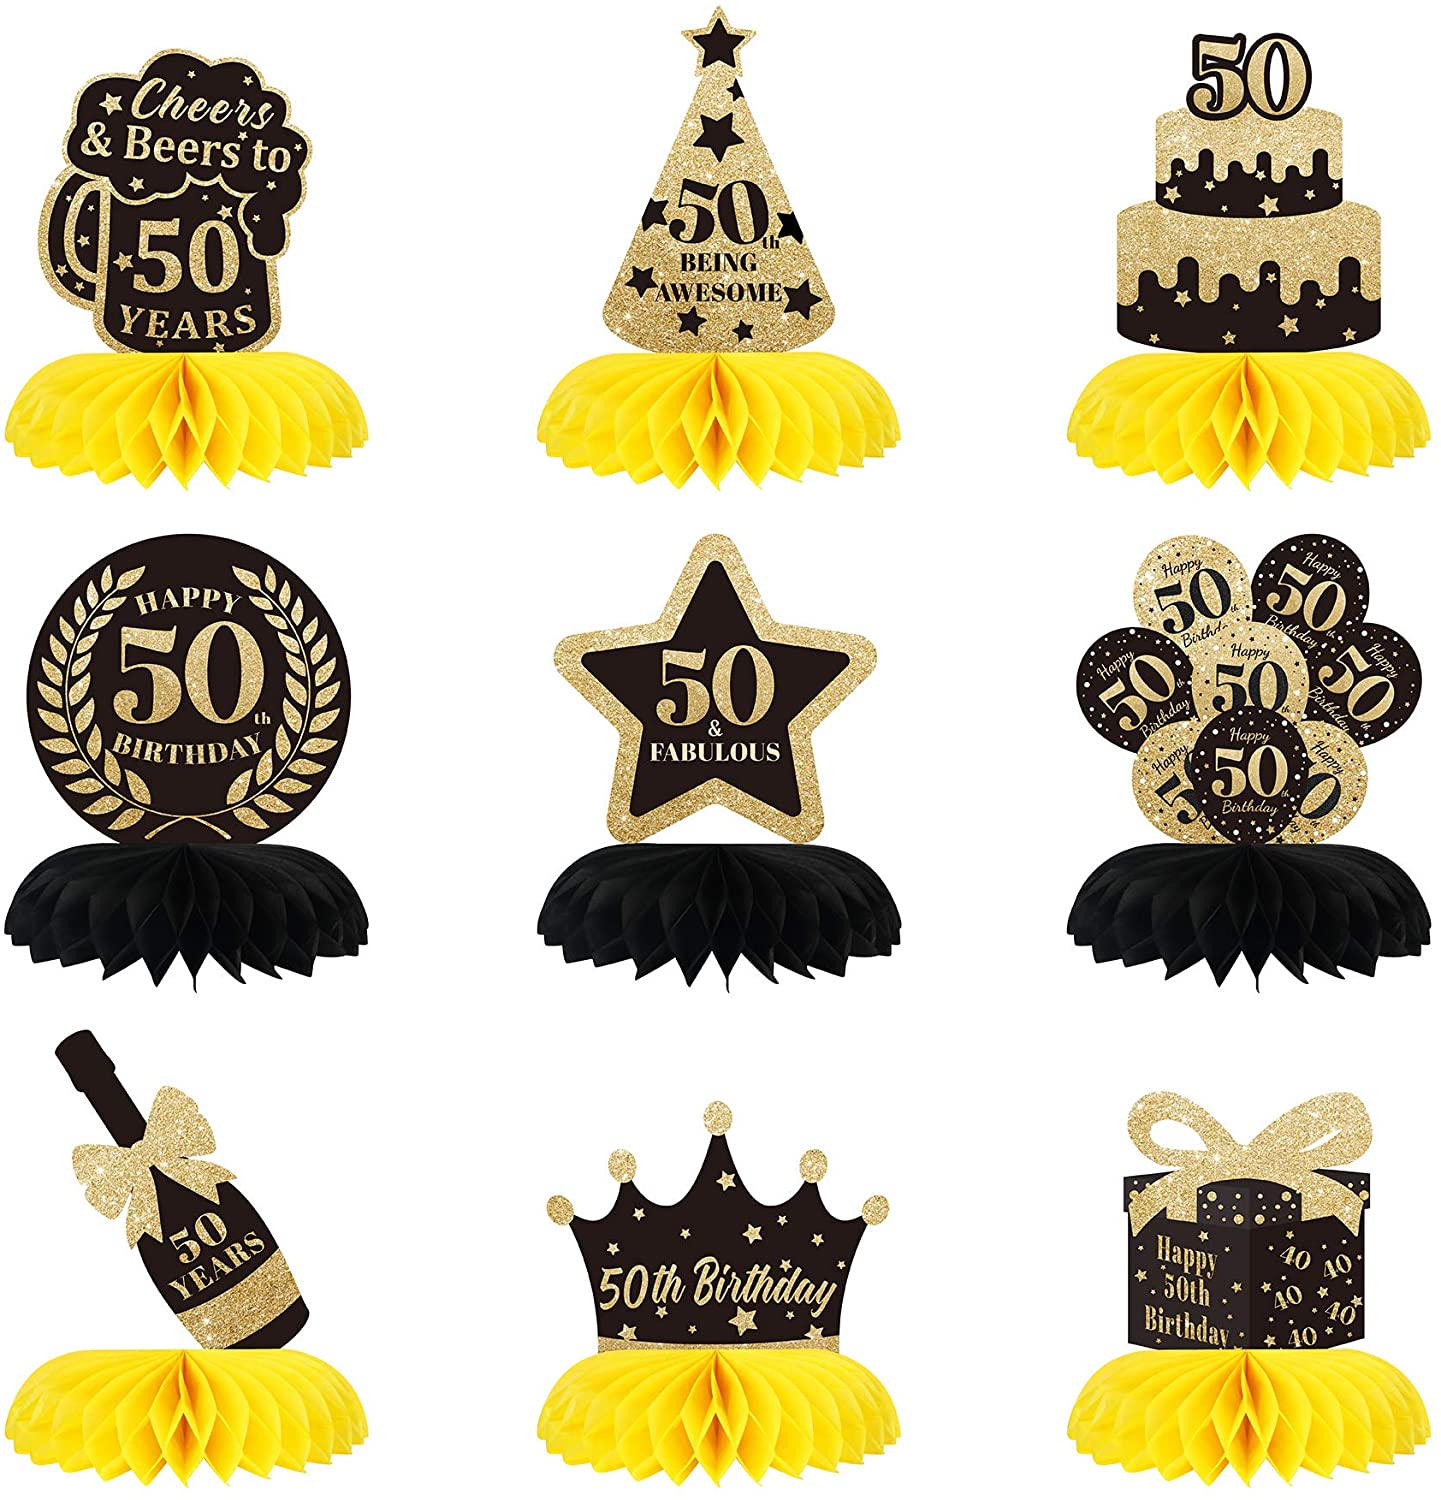 50th Birthday Party Decorations That Will Make Your Party Fabulous